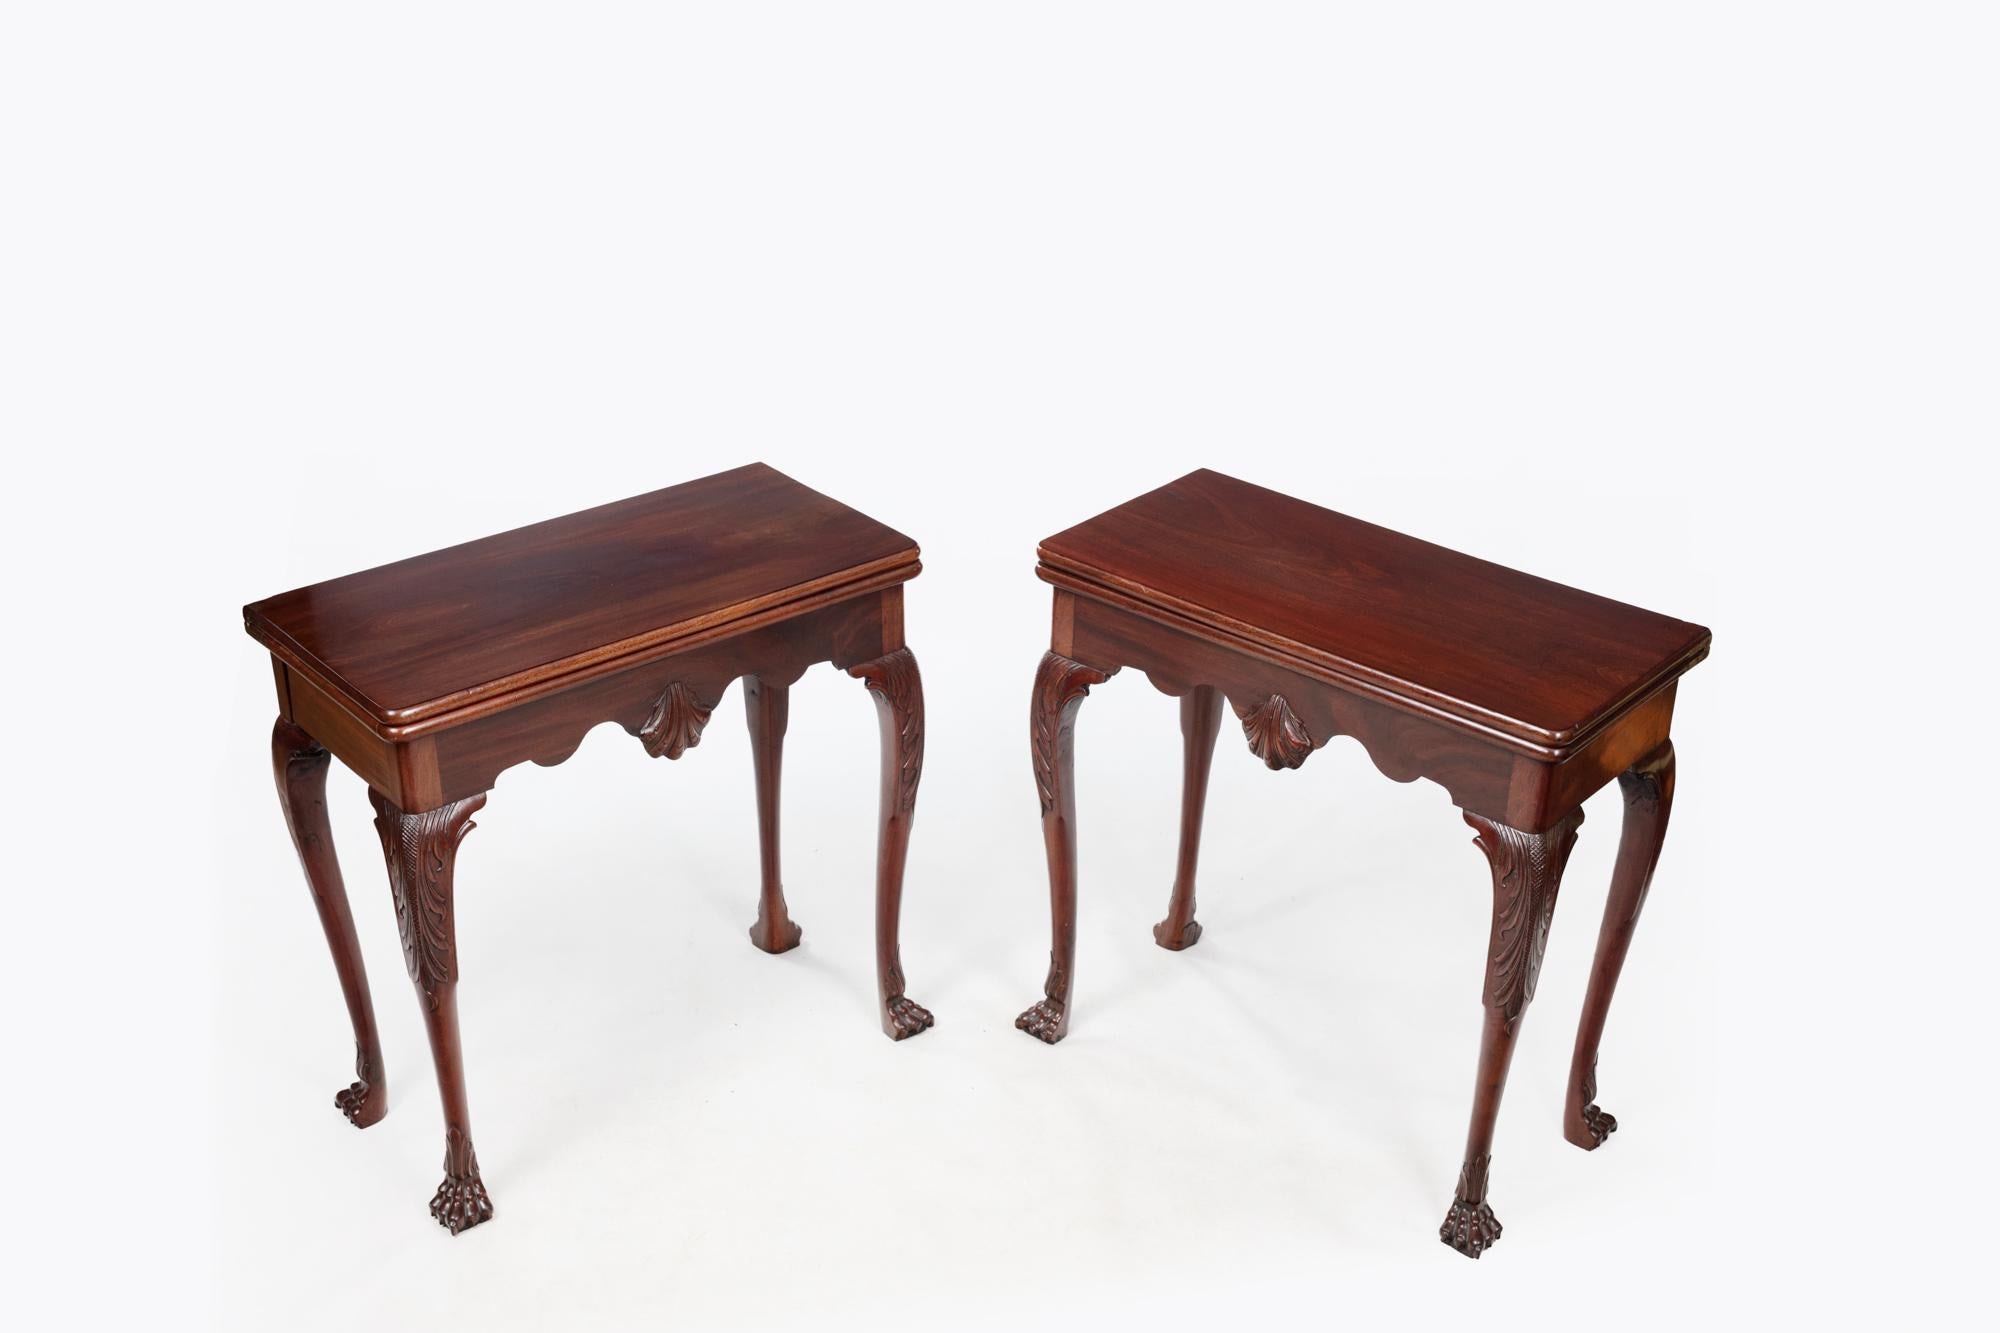 18th Century pair Irish mahogany fold-over card tables with green baize interiors. The pair with central carved scallop shell detail are flanked on either side by cabriole legs with trailing acanthus leaf carvings, terminating in hairy paw